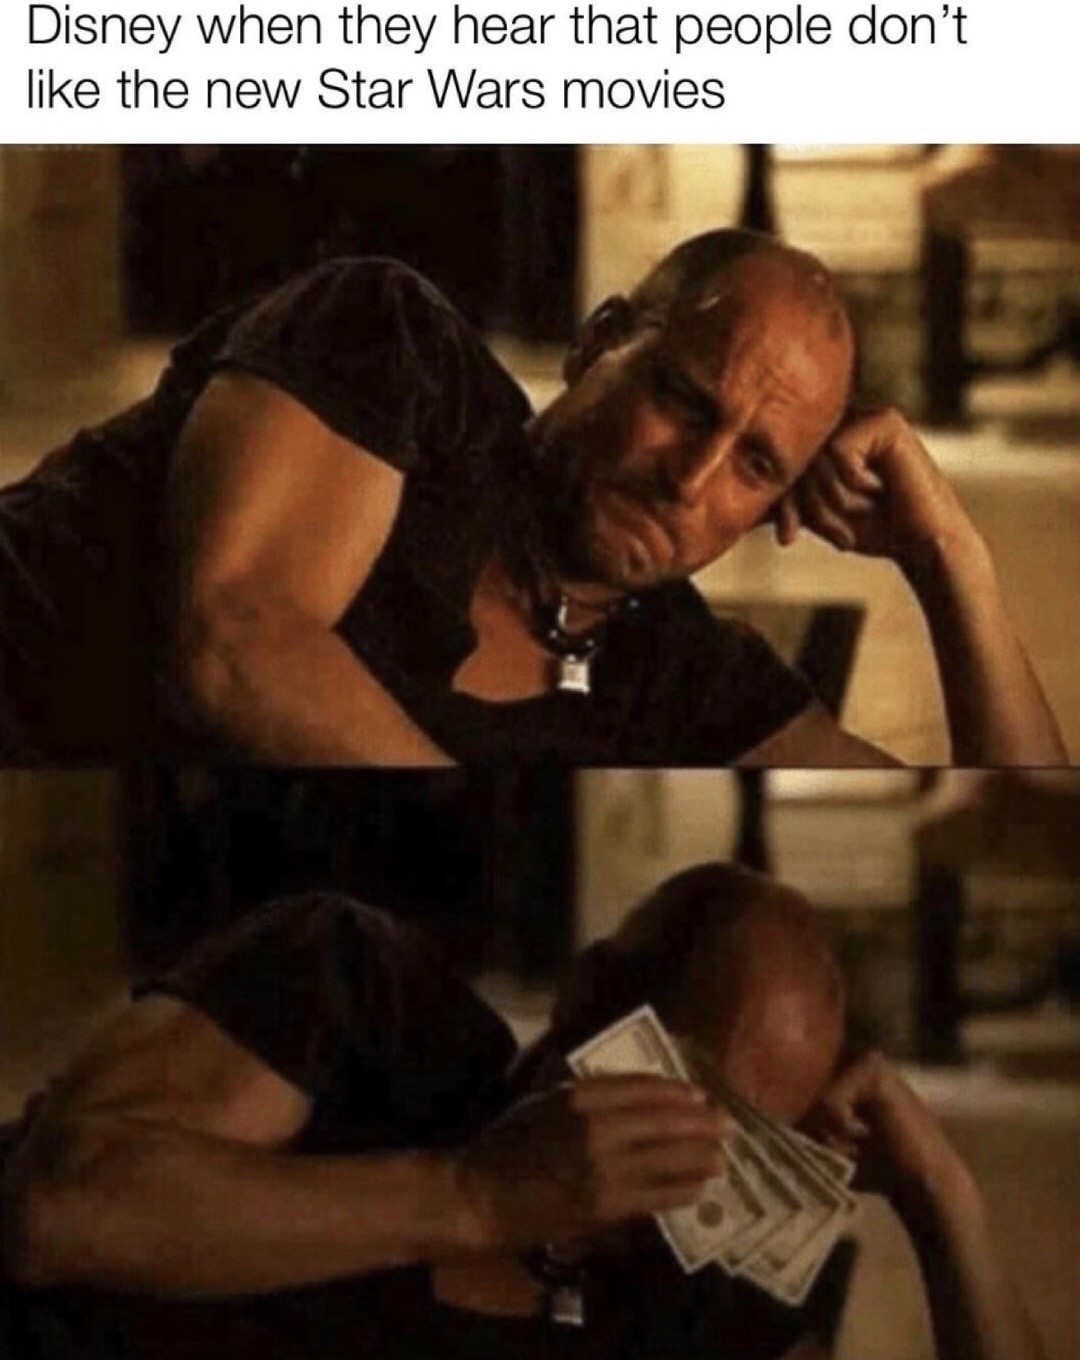 woody harrelson crying money meme - Disney when they hear that people don't the new Star Wars movies